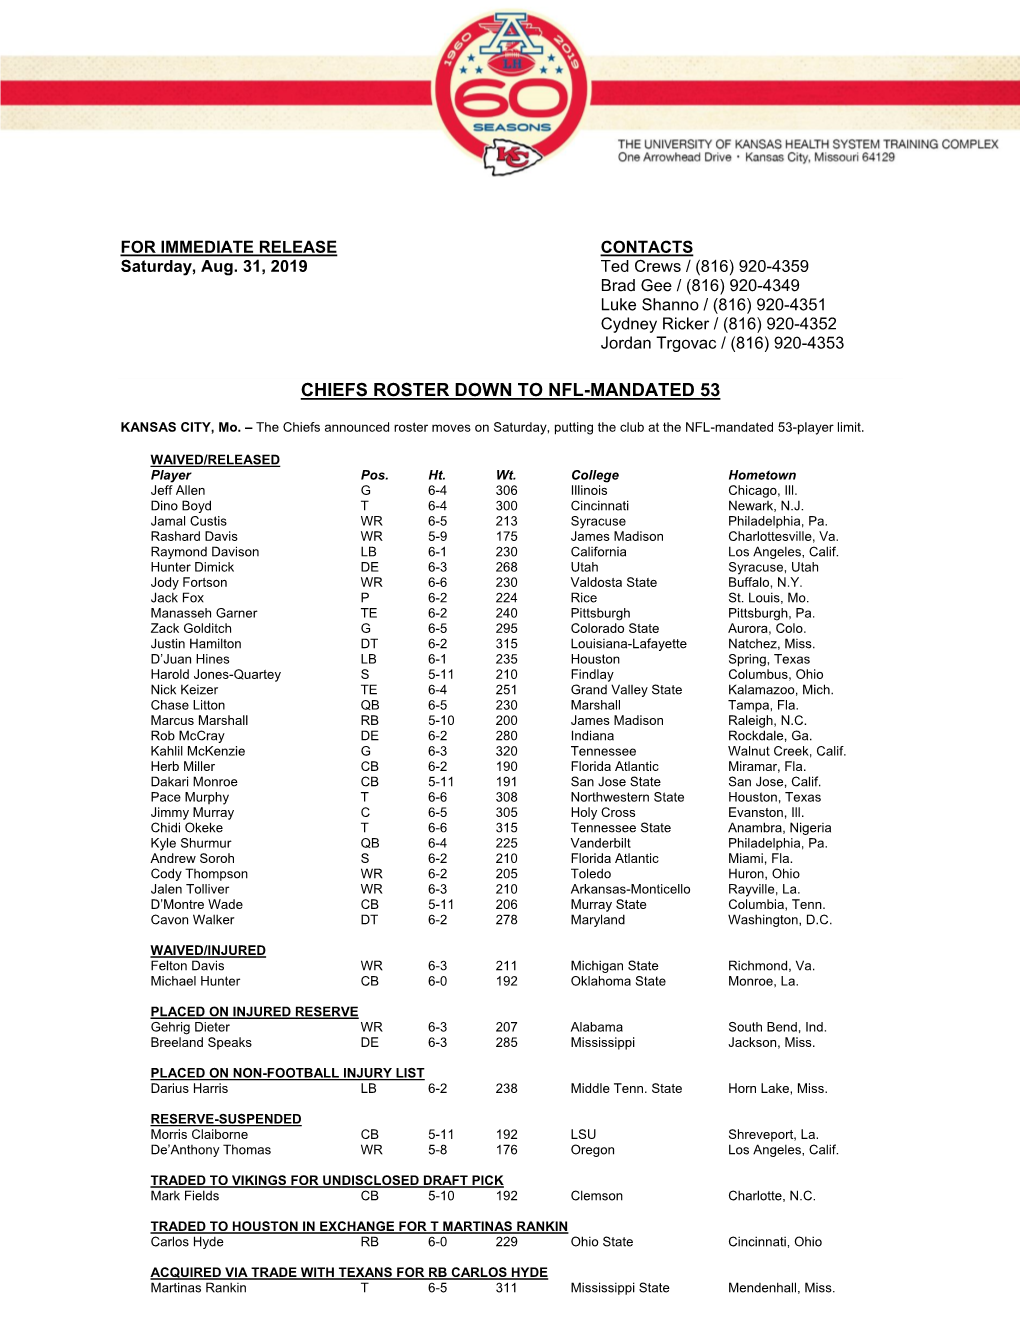 Chiefs Roster Down to Nfl-Mandated 53